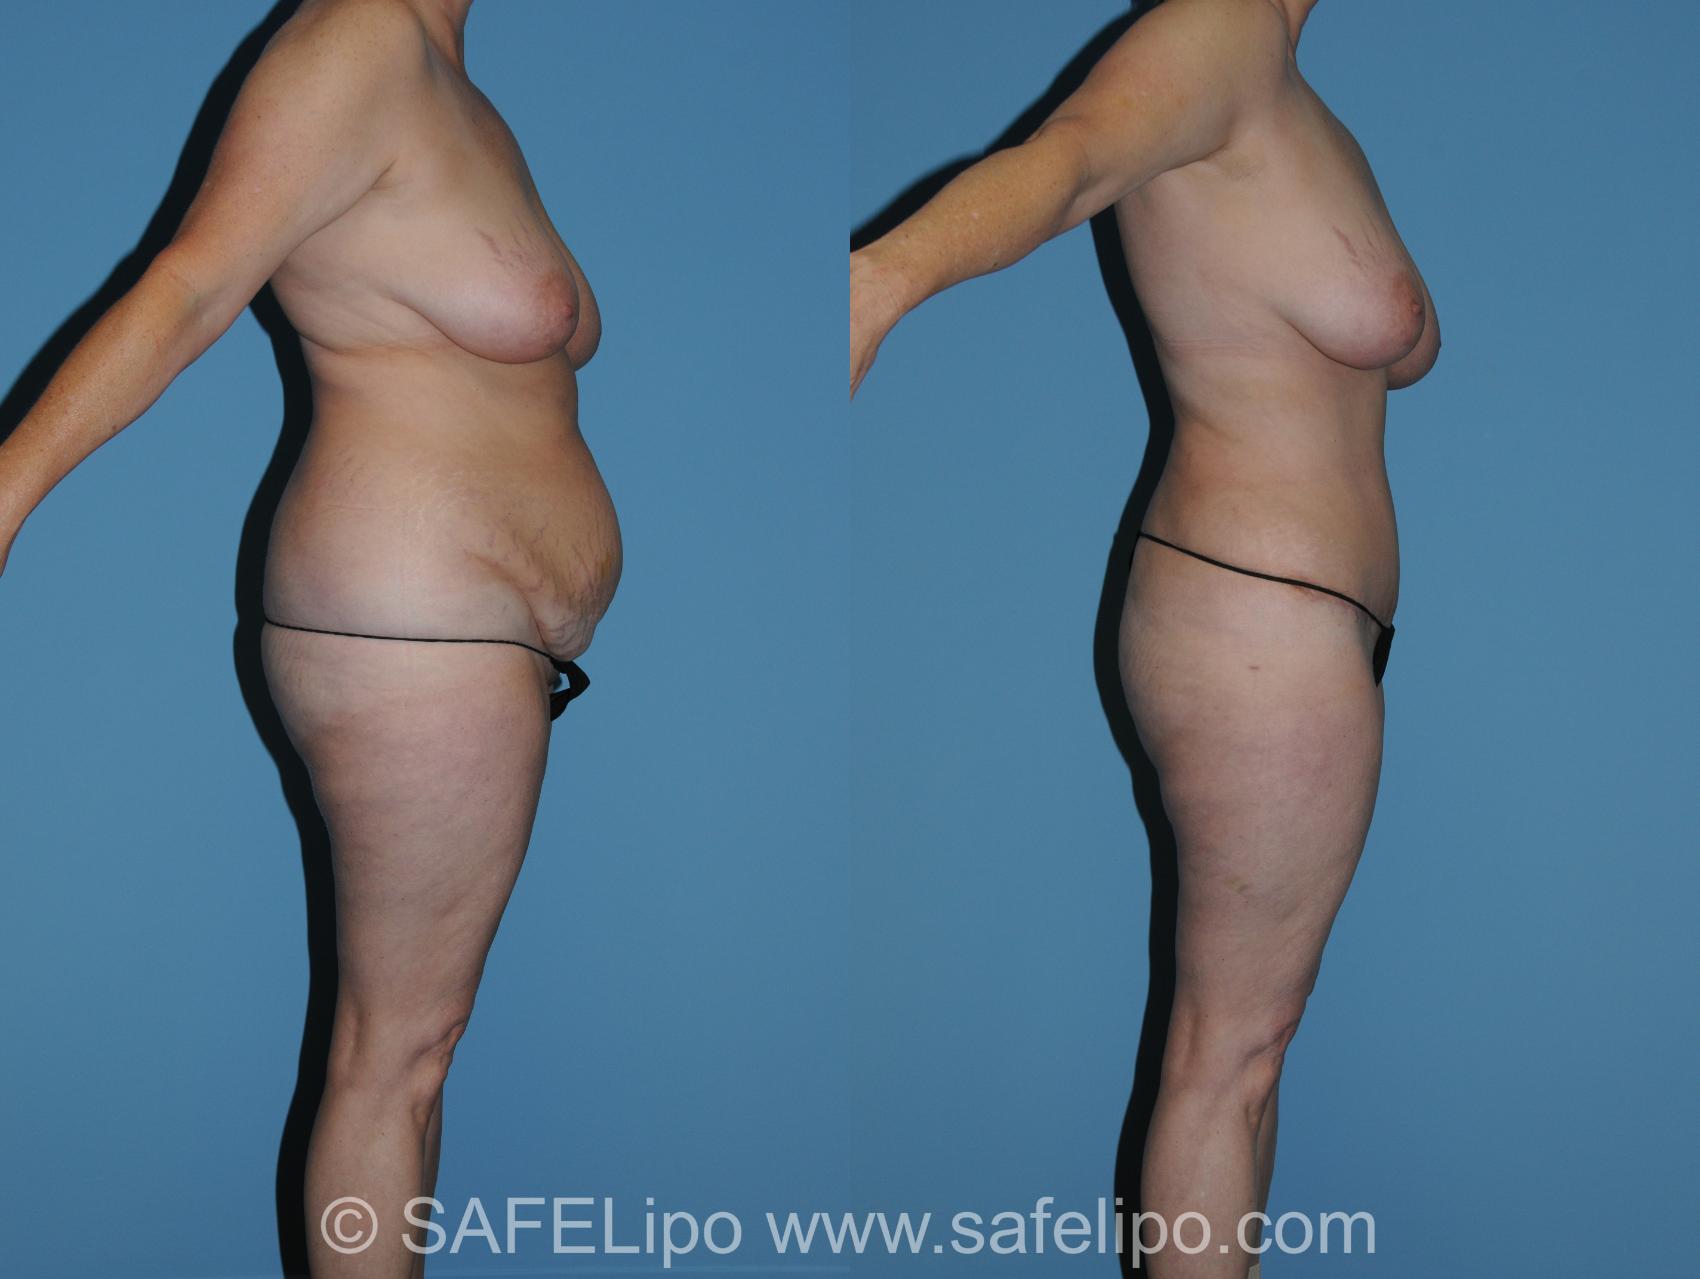 Abdominoplasty Right Side Photo, Shreveport, LA, The Wall Center for Plastic Surgery, Case 316